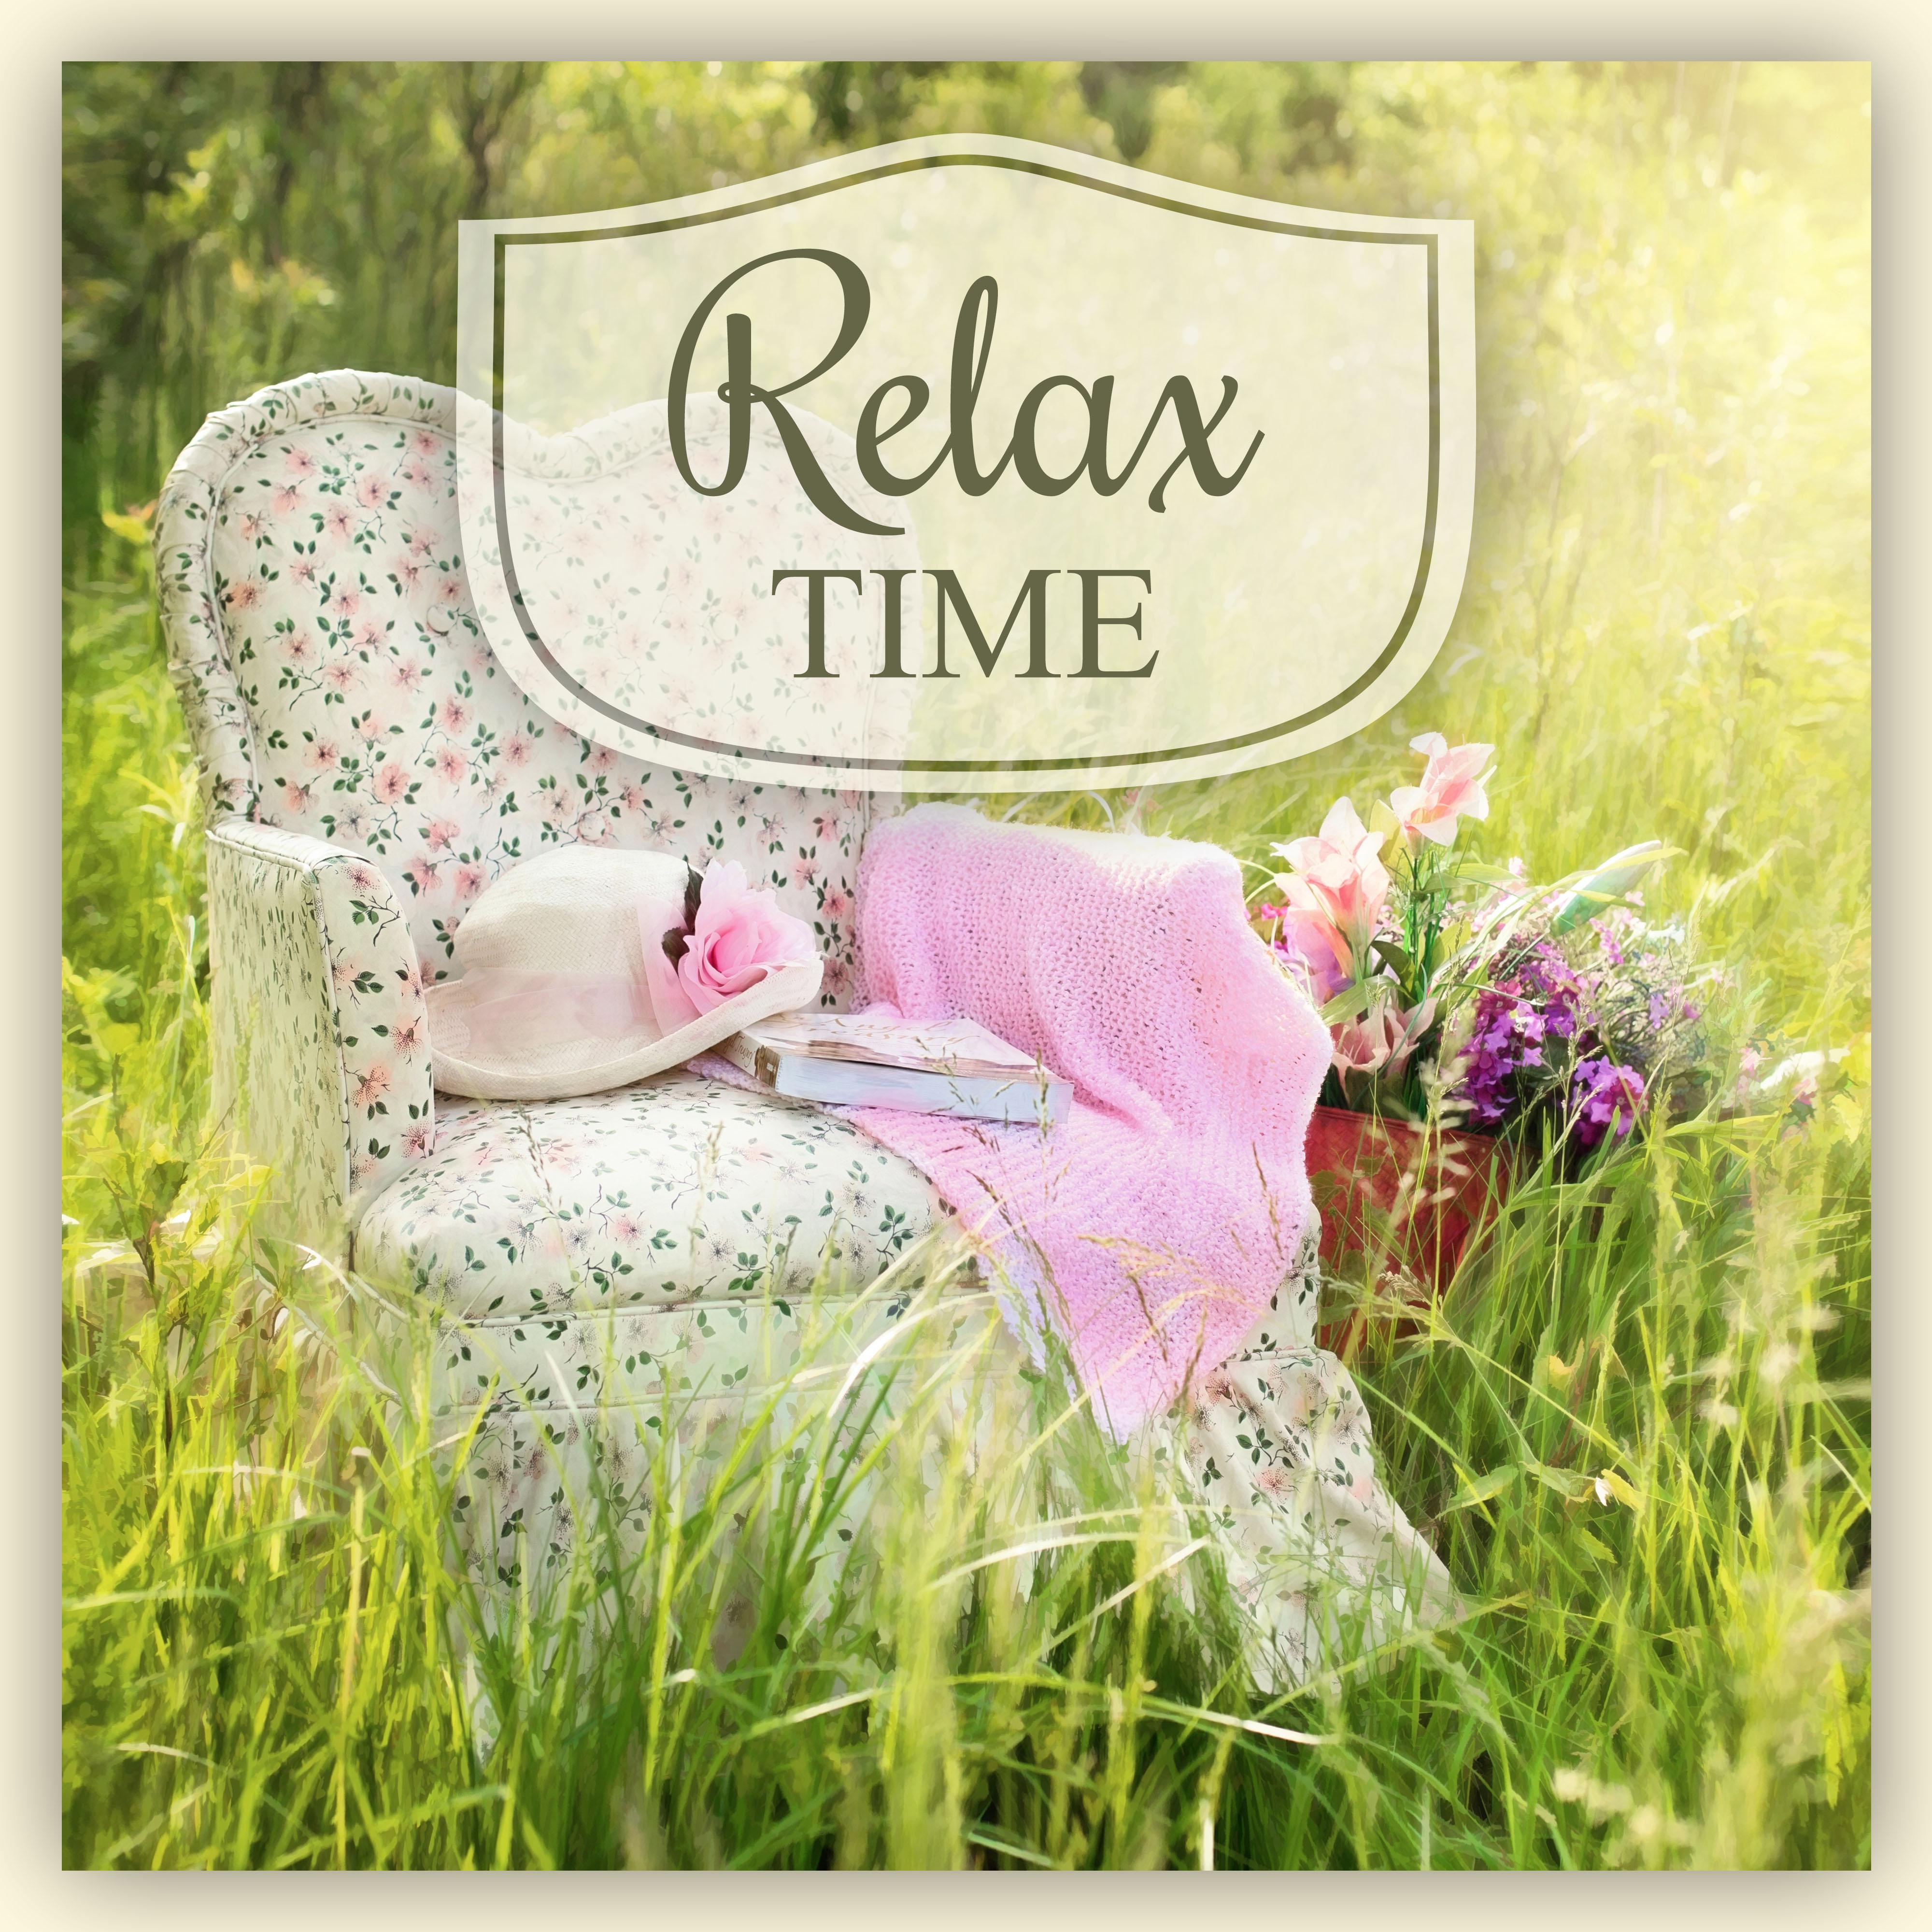 Relax Time  New Age Music for Time to Rest, Best Healing Music for Massage, Relaxing Therapy, Calming Music, Nature Sounds